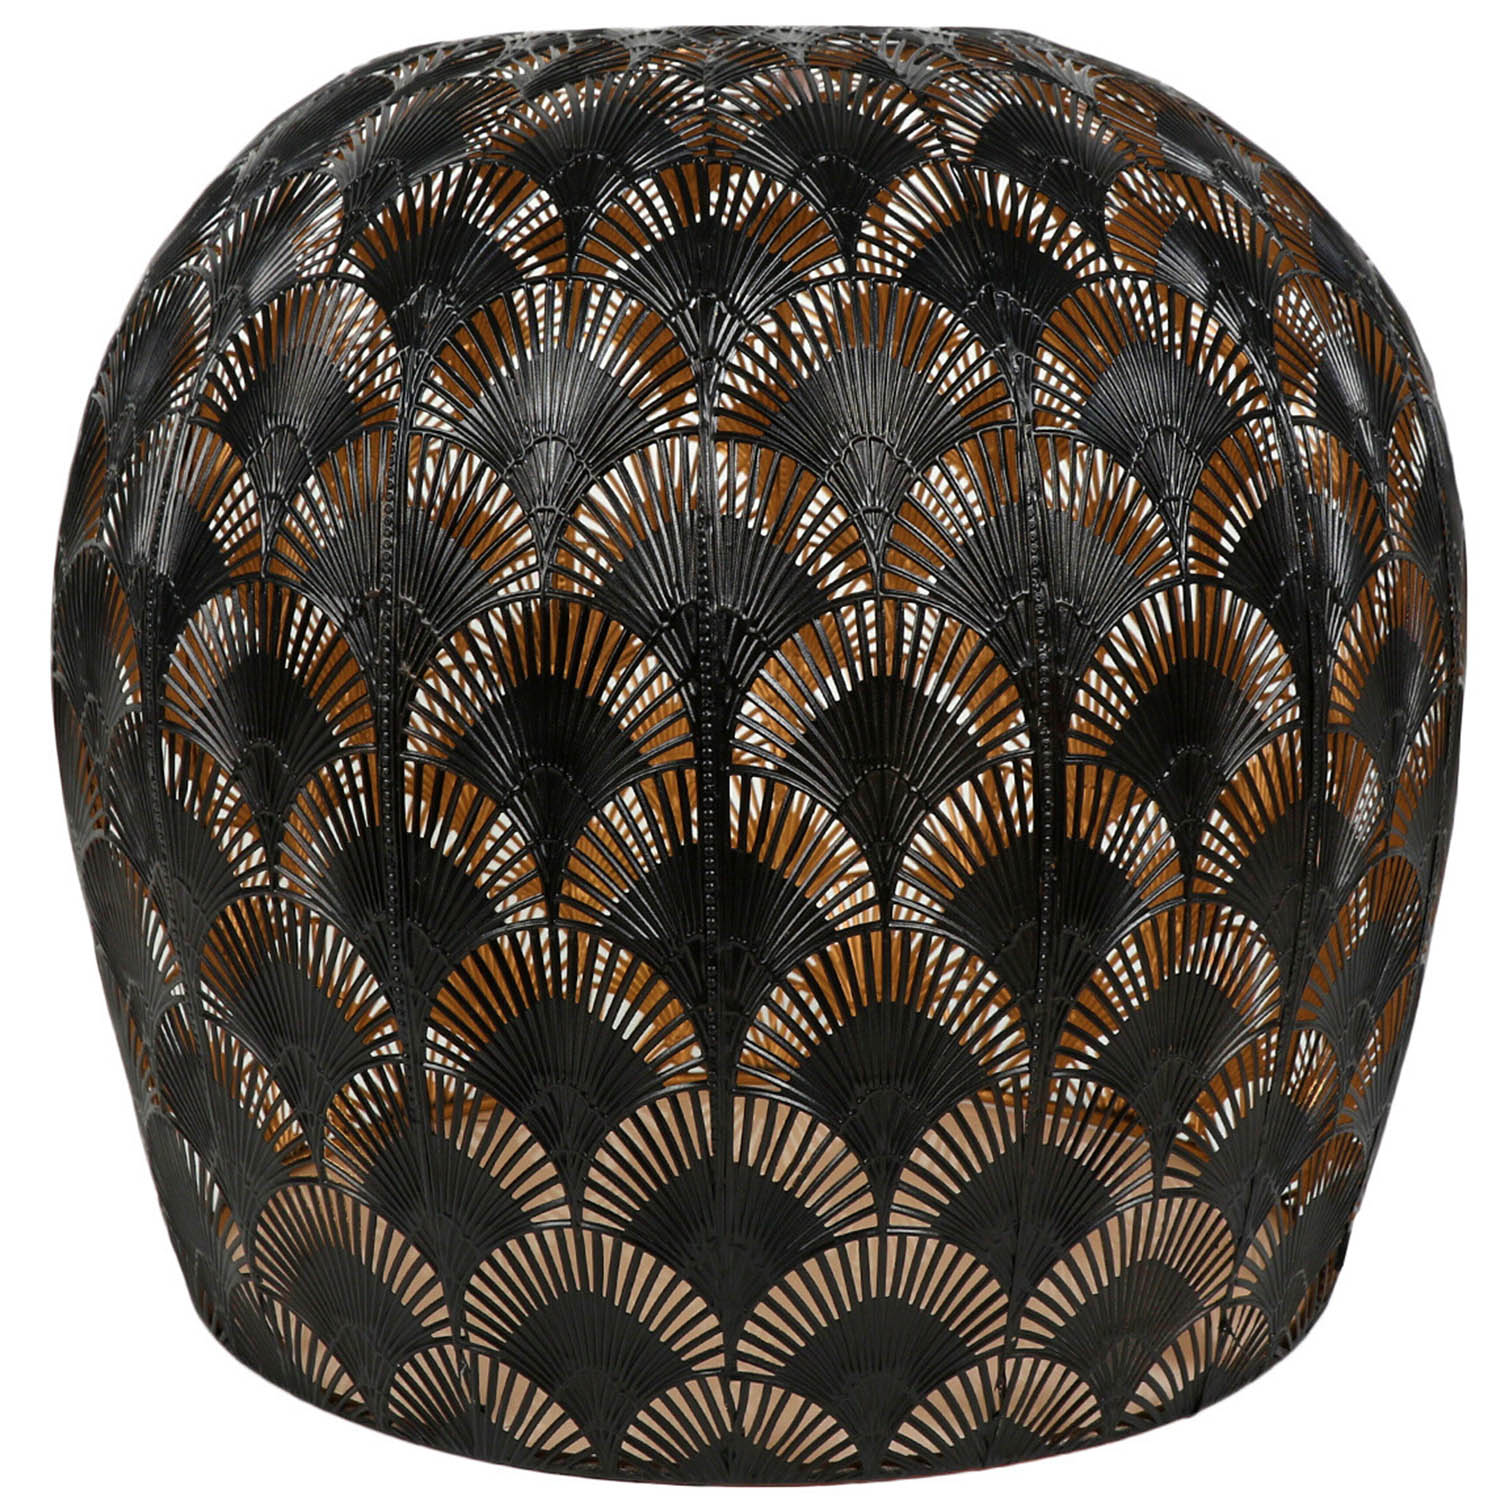 Black and Gold Morrocan Dome Pendant Light Image